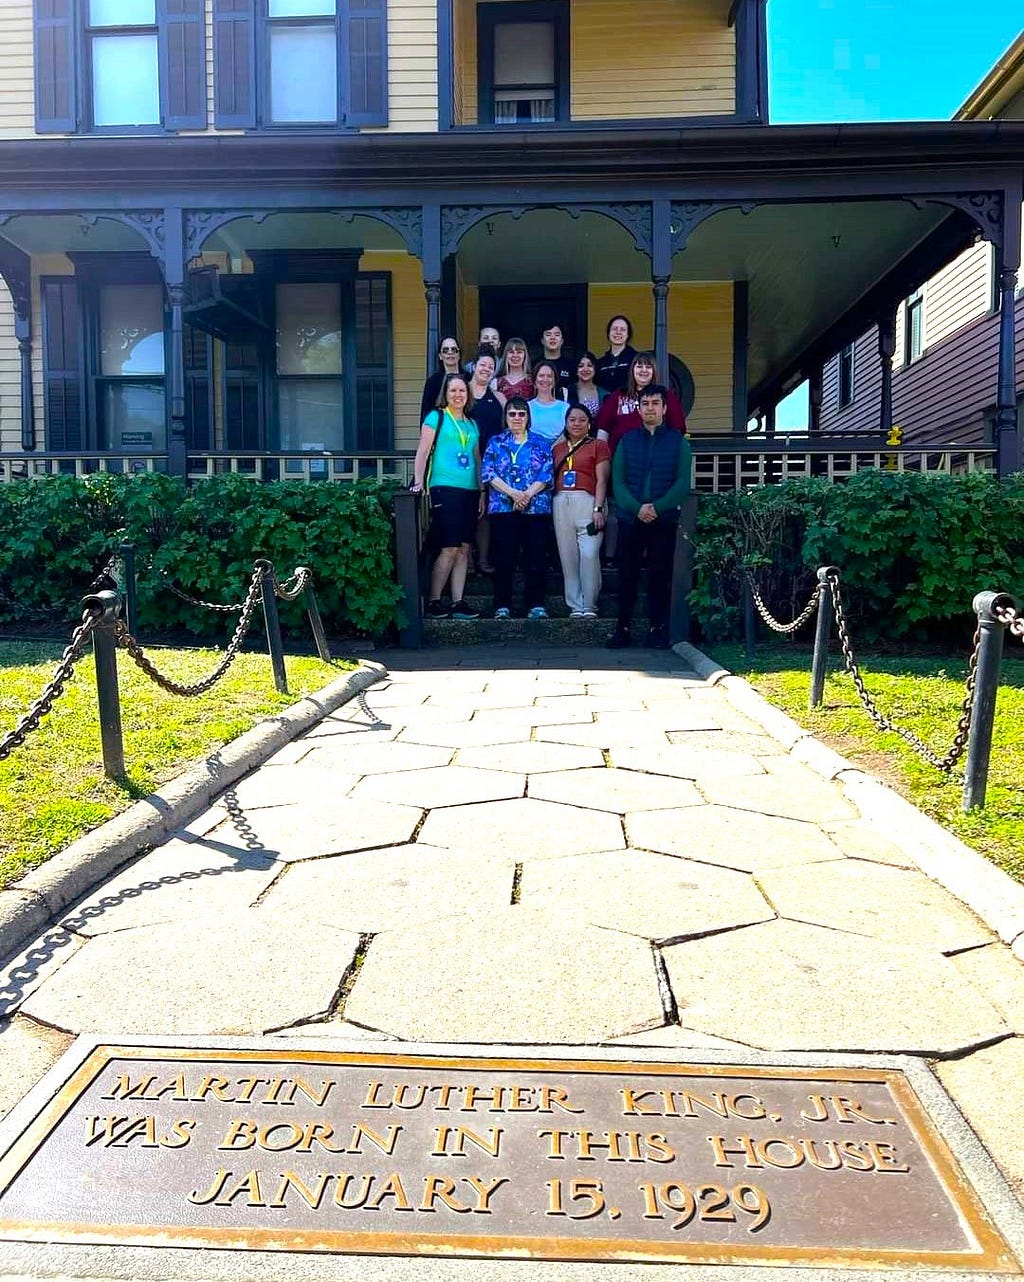 A group of 13 people are posing on the steps of an old Victorian-style home. On the stone pathway in front of them is a plaque saying Martin Luther King Jr. lived in the home.